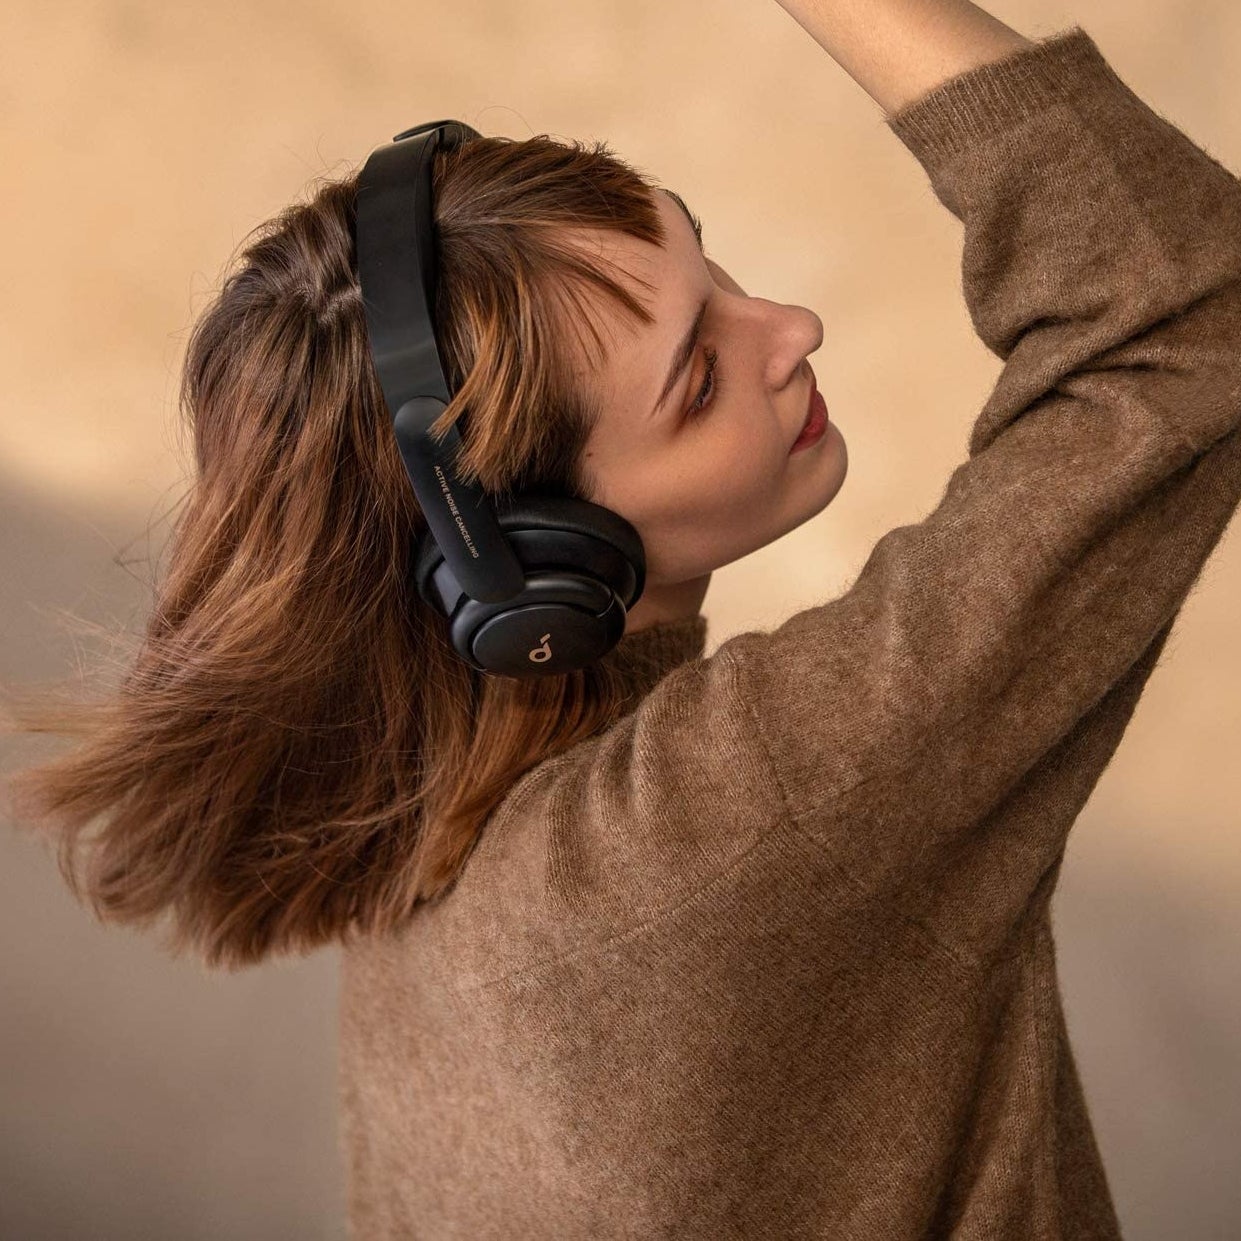 a person dancing while wearing the wireless over the ear headphones